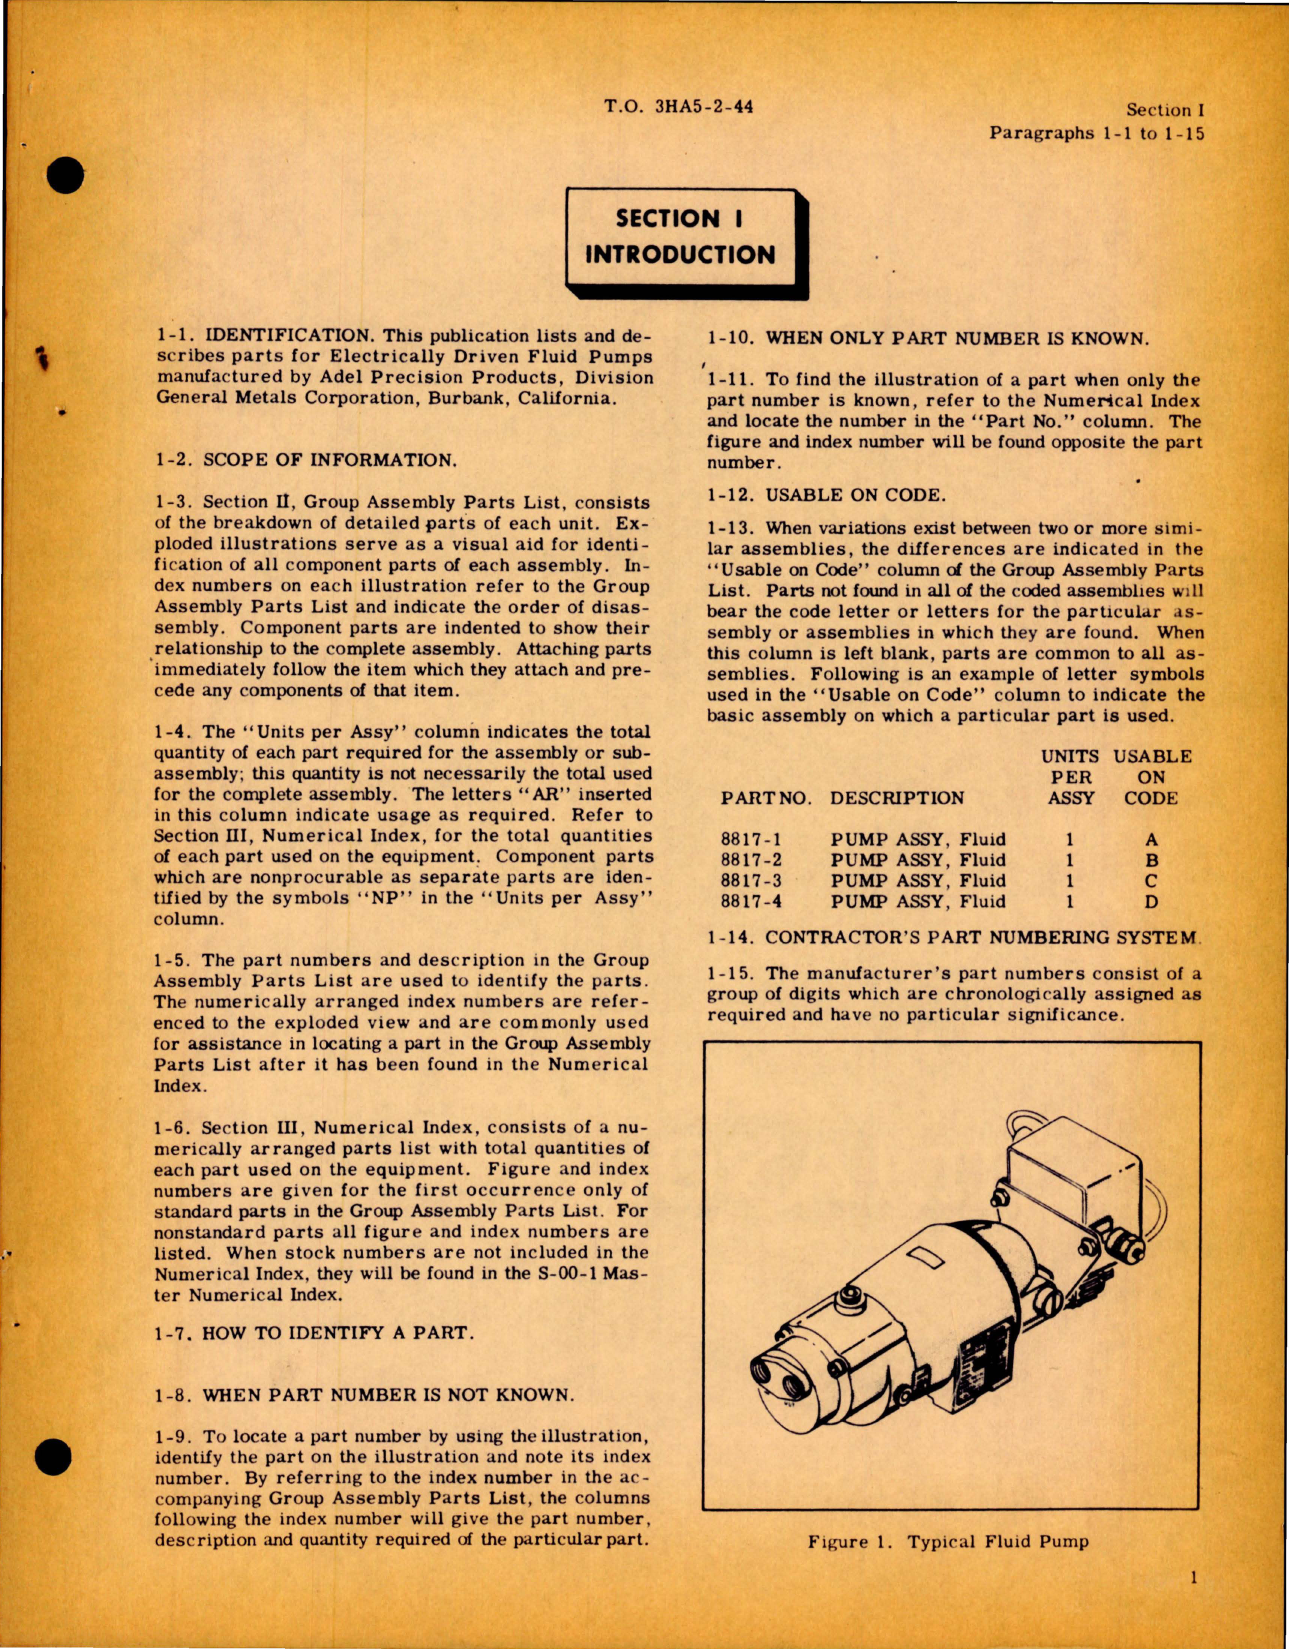 Sample page 5 from AirCorps Library document: Illustrated Parts Breakdown for Electrically Driven Fluid Pumps